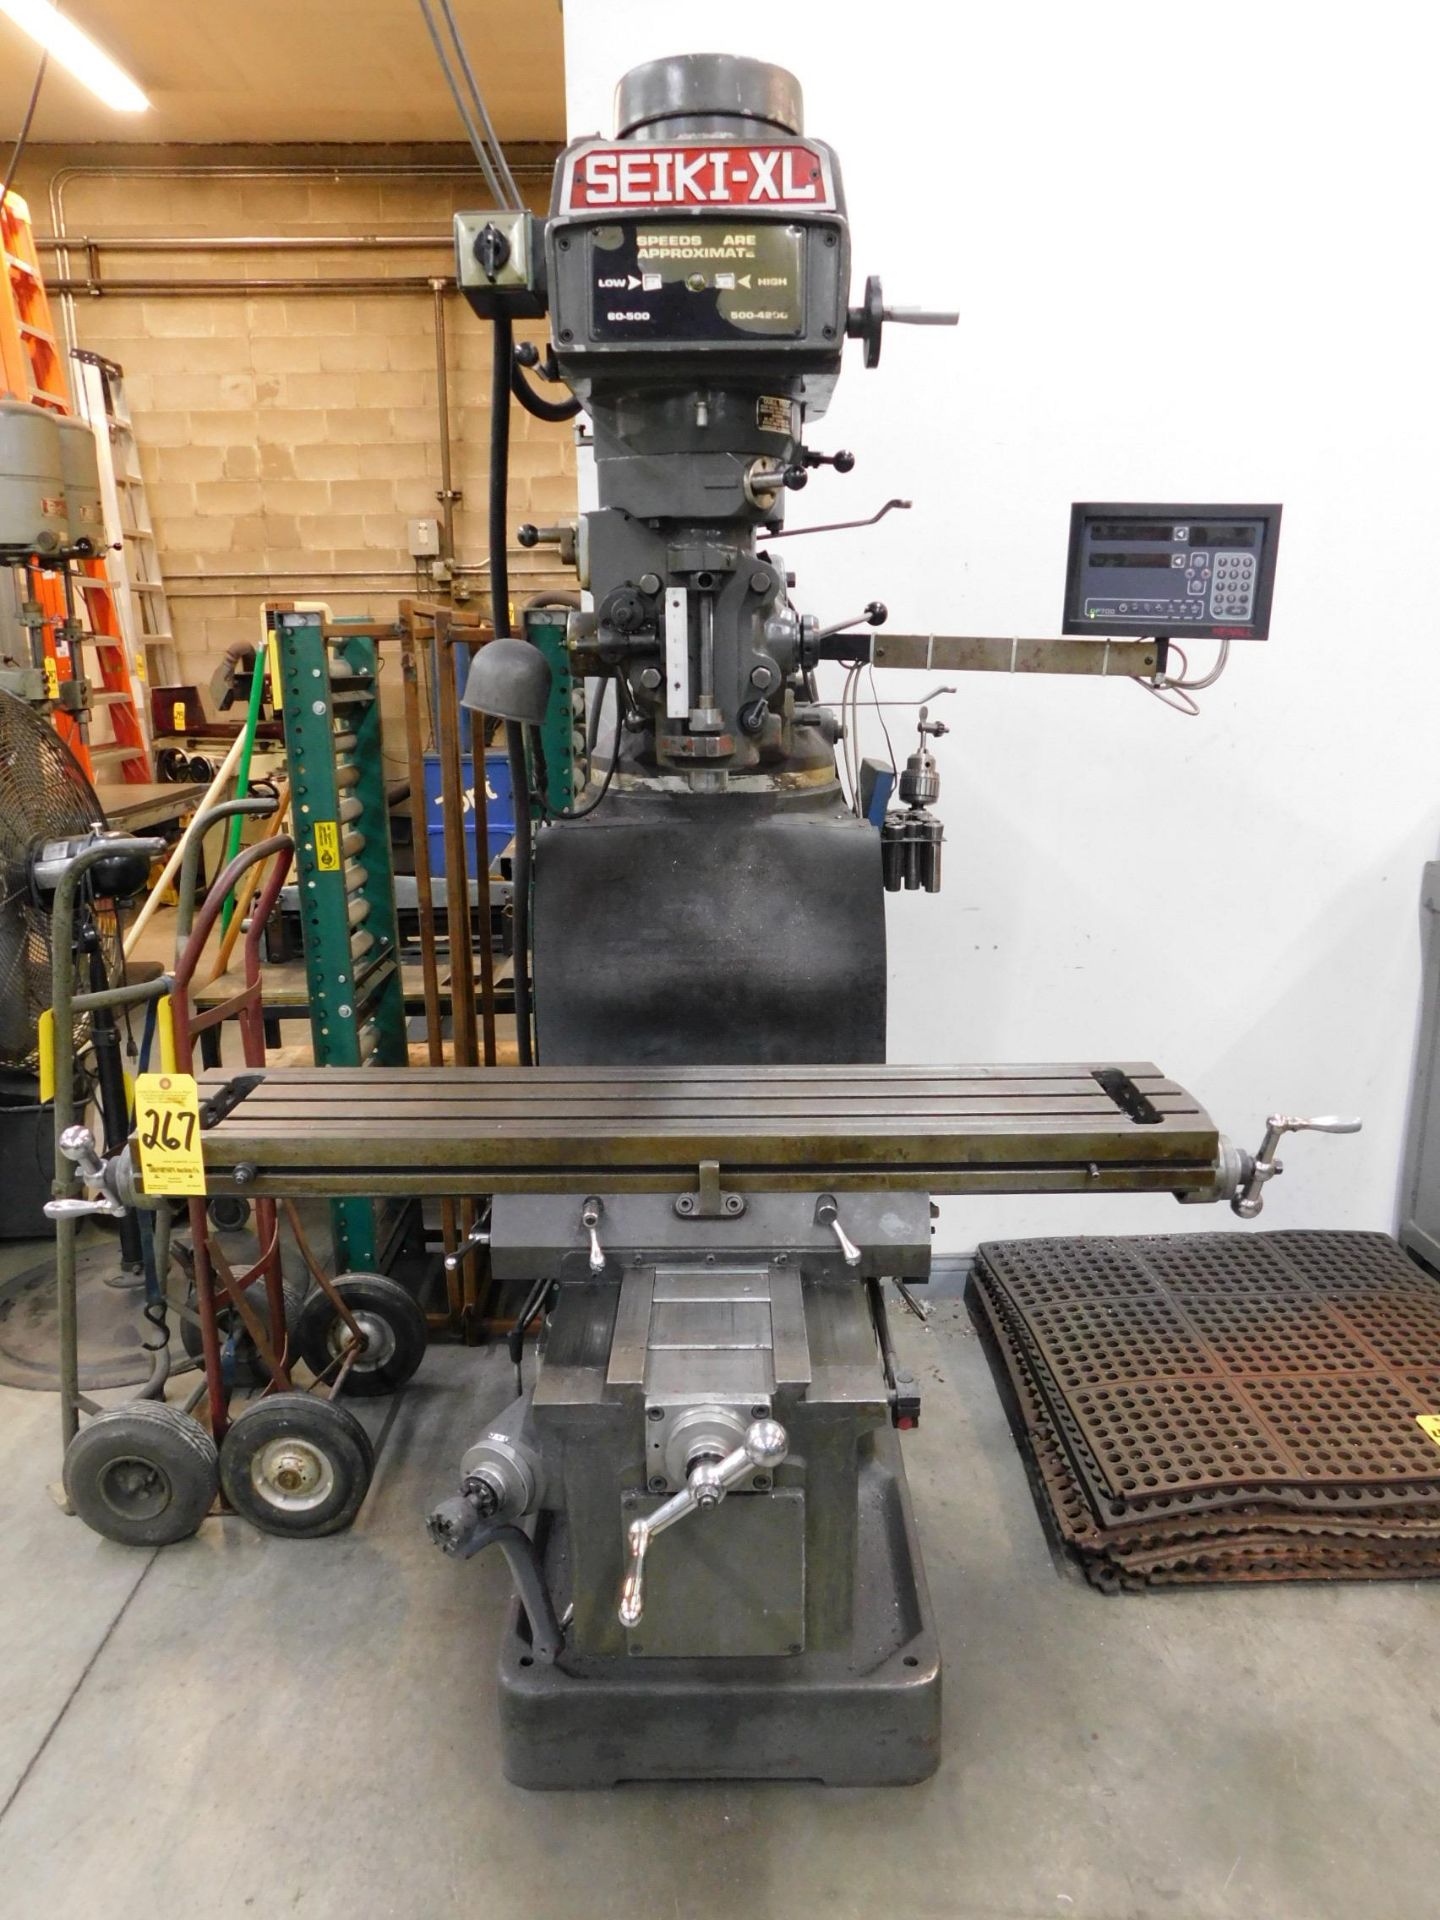 Seiki-XL Vertical Mill, Model 3VX, s/n 8225, 10” X 50” Table, Newall D.R.O., 3 HP, R-8 Spindle - Image 2 of 7